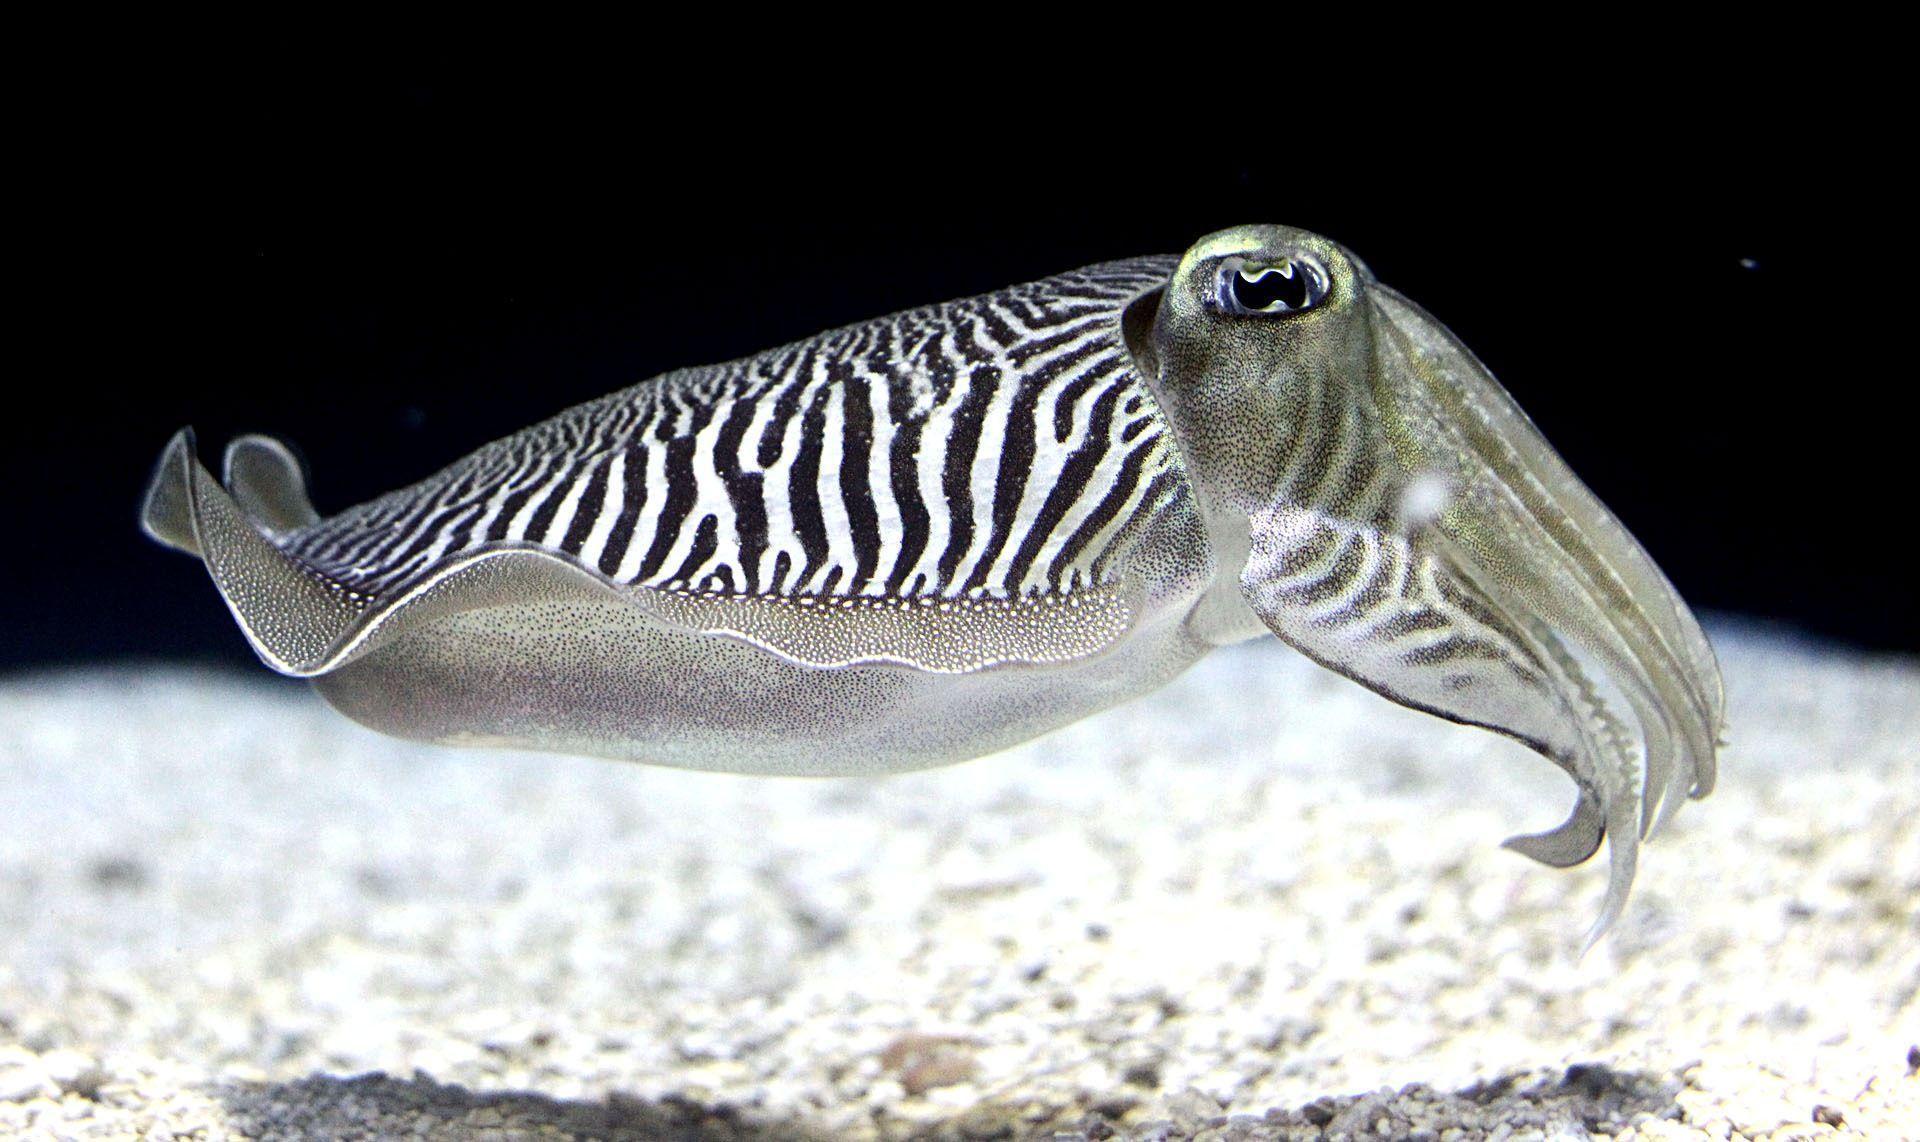 Cuttlefish Fish Underwater Animals Ocean Hd Wallpaper For Android Mobile :  Wallpapers13.com